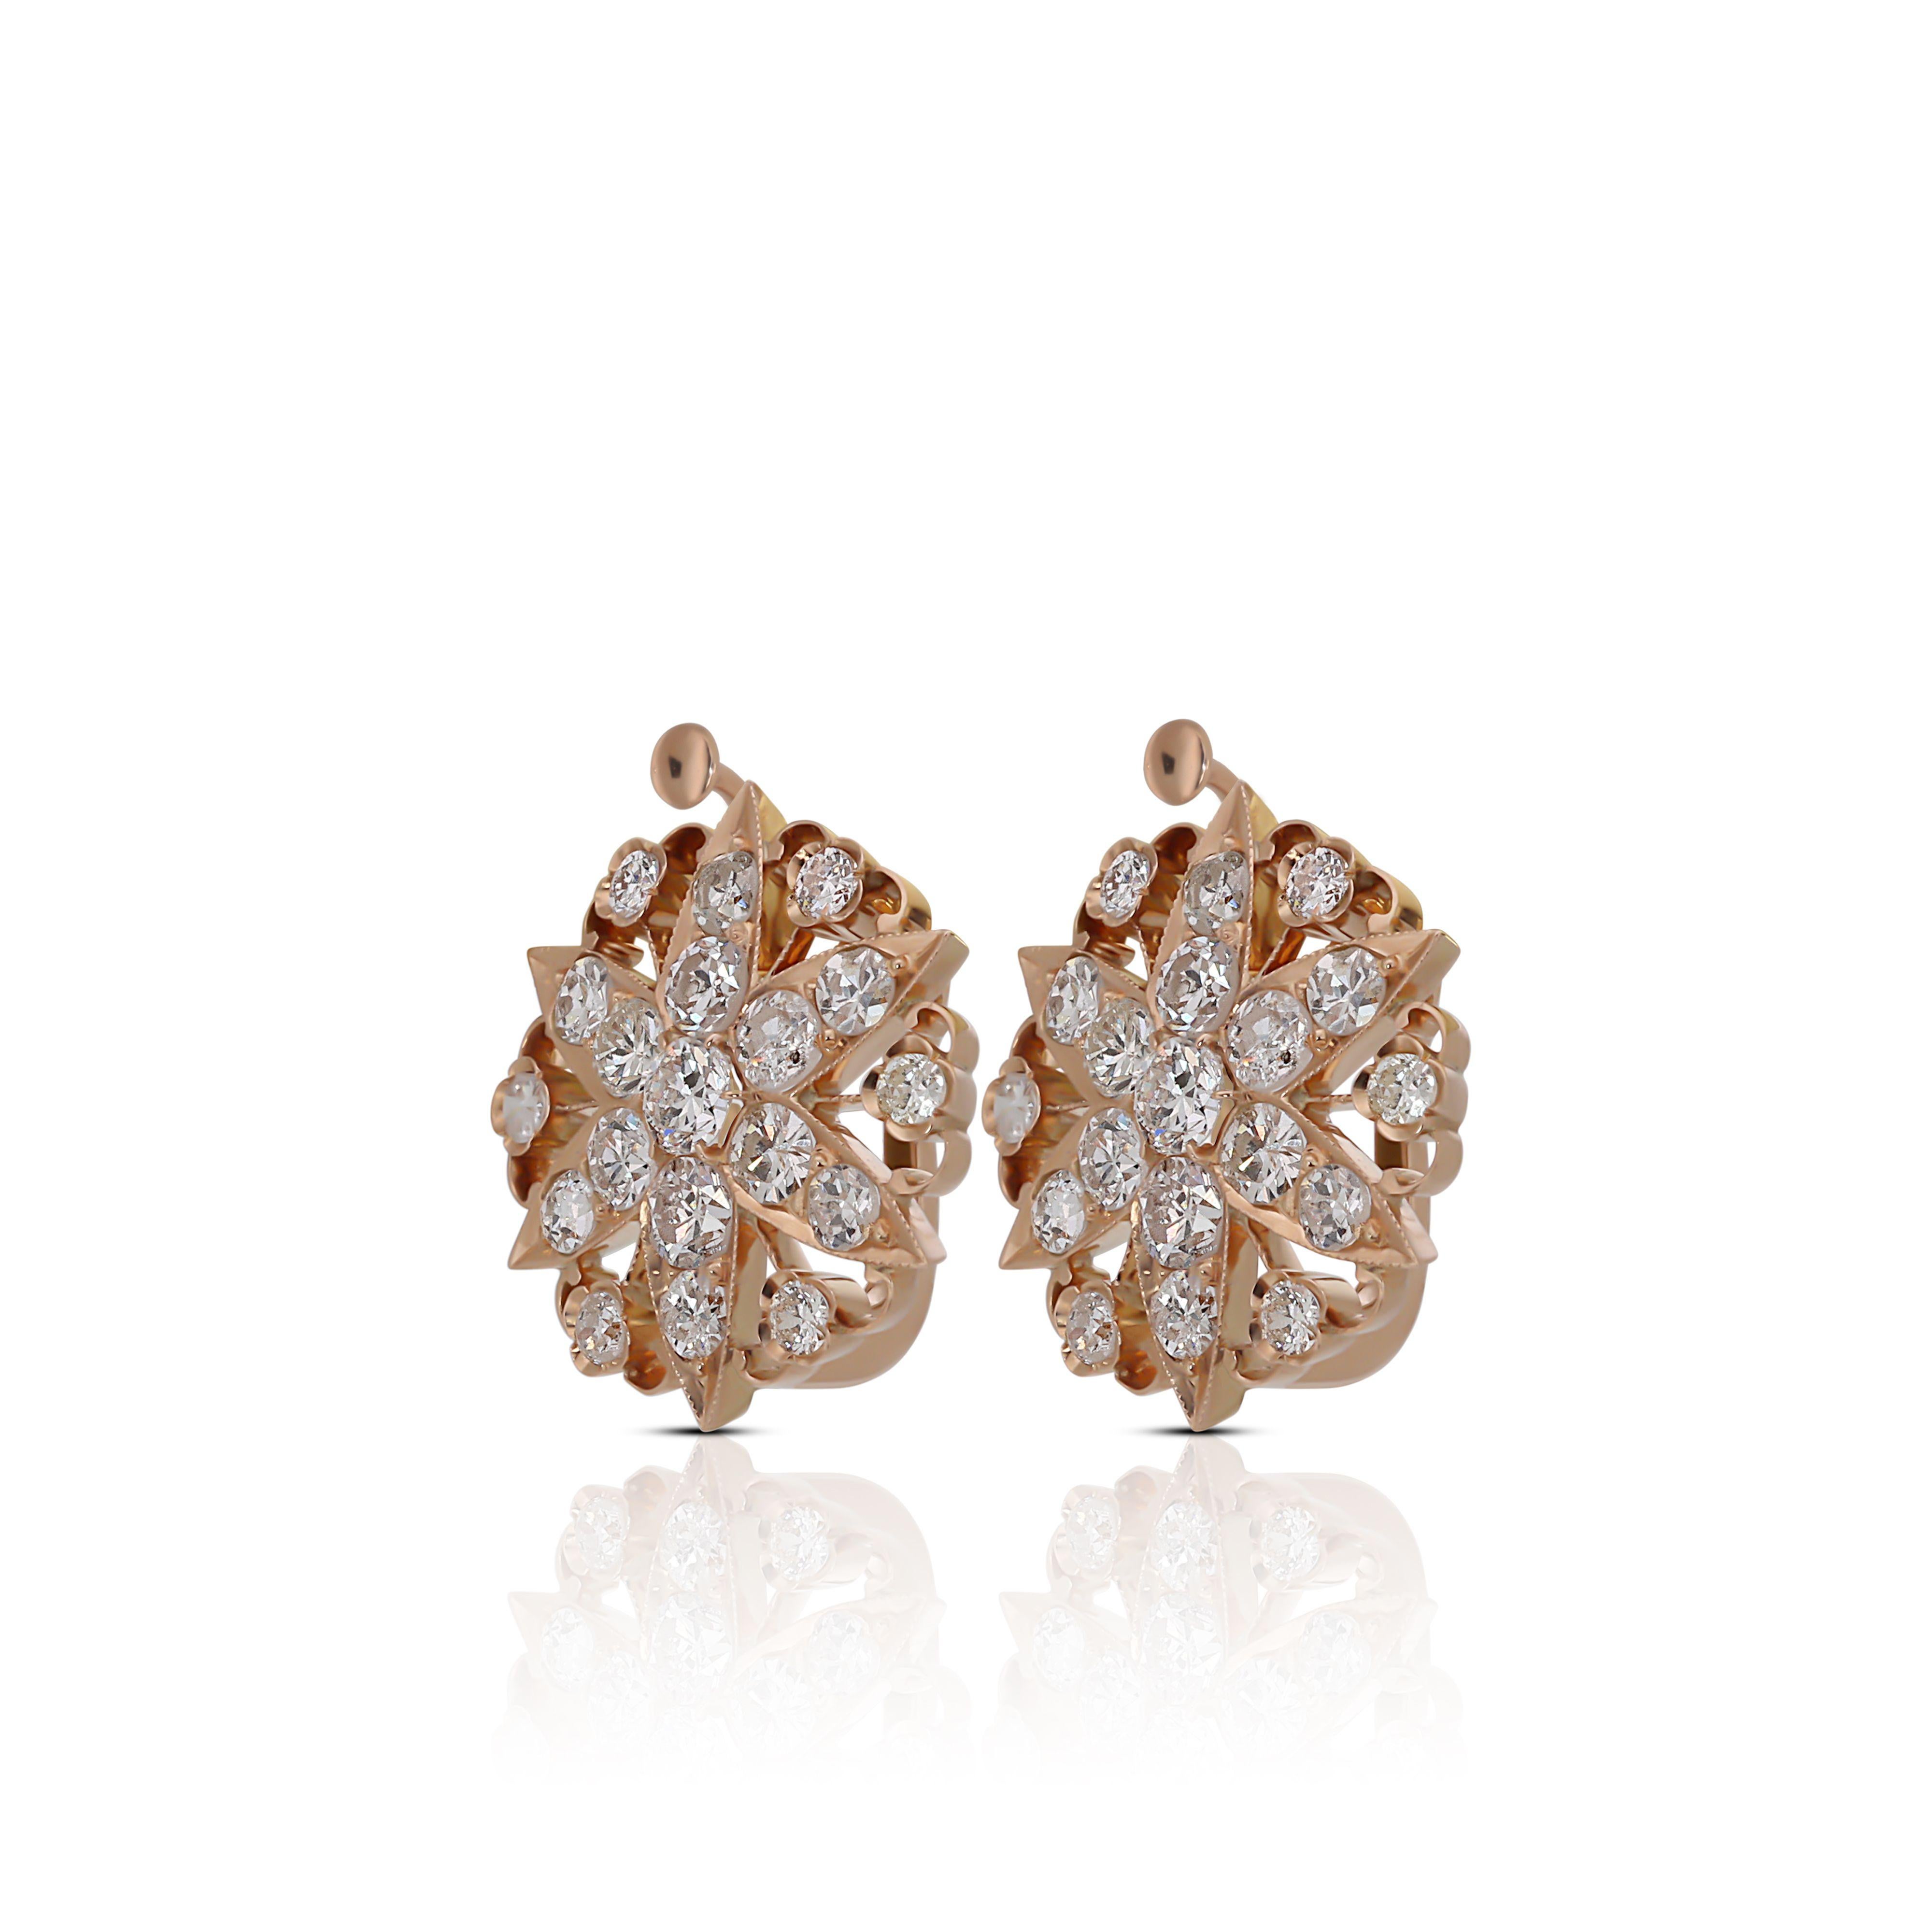 Round Cut Luxurious 18k Yellow Gold Cluster Earrings with 2.06 Carat of Natural Diamonds